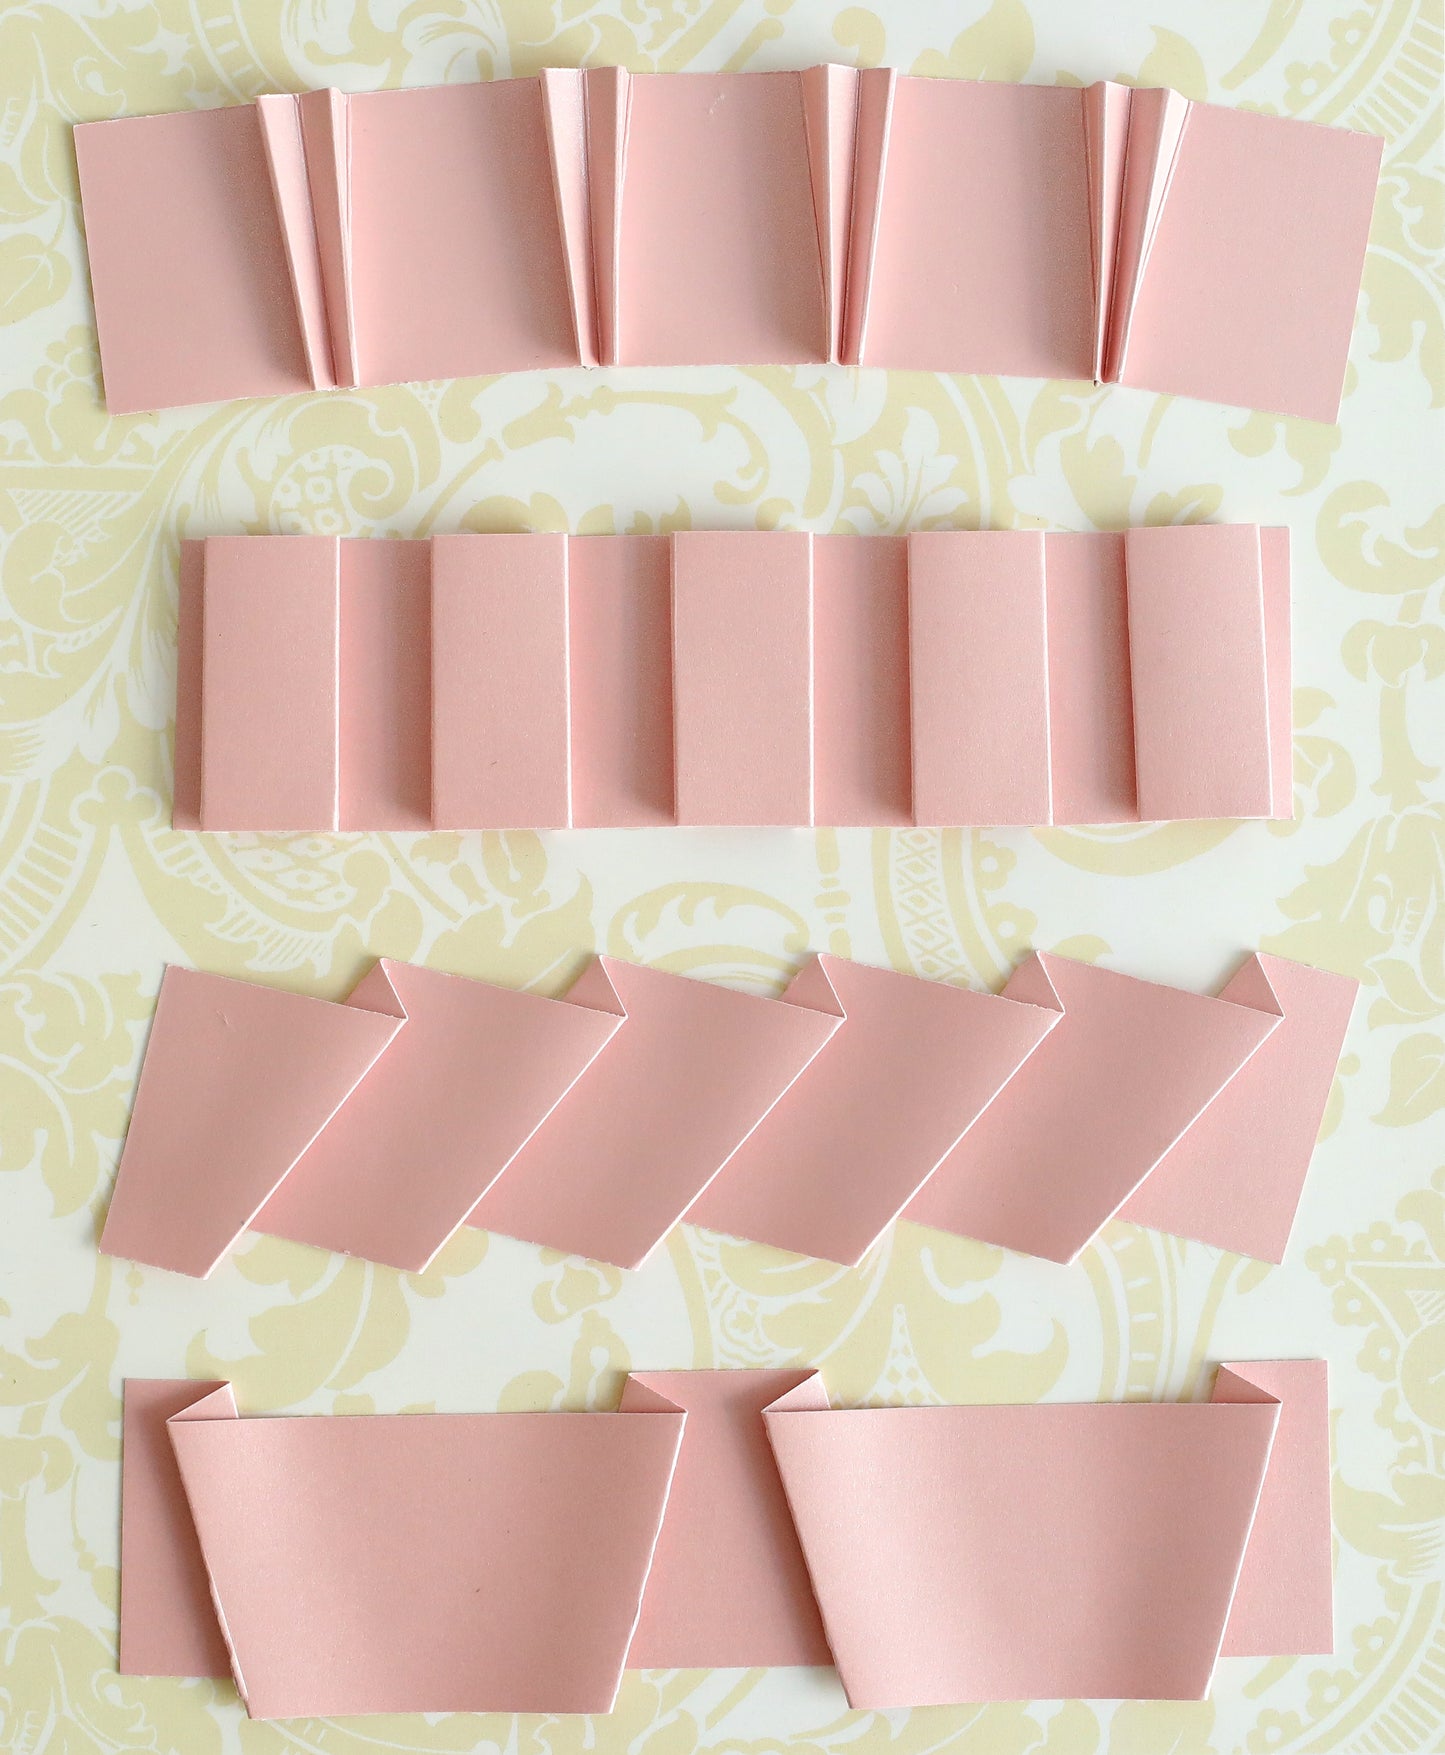 several pieces of pink folded paper on a table.